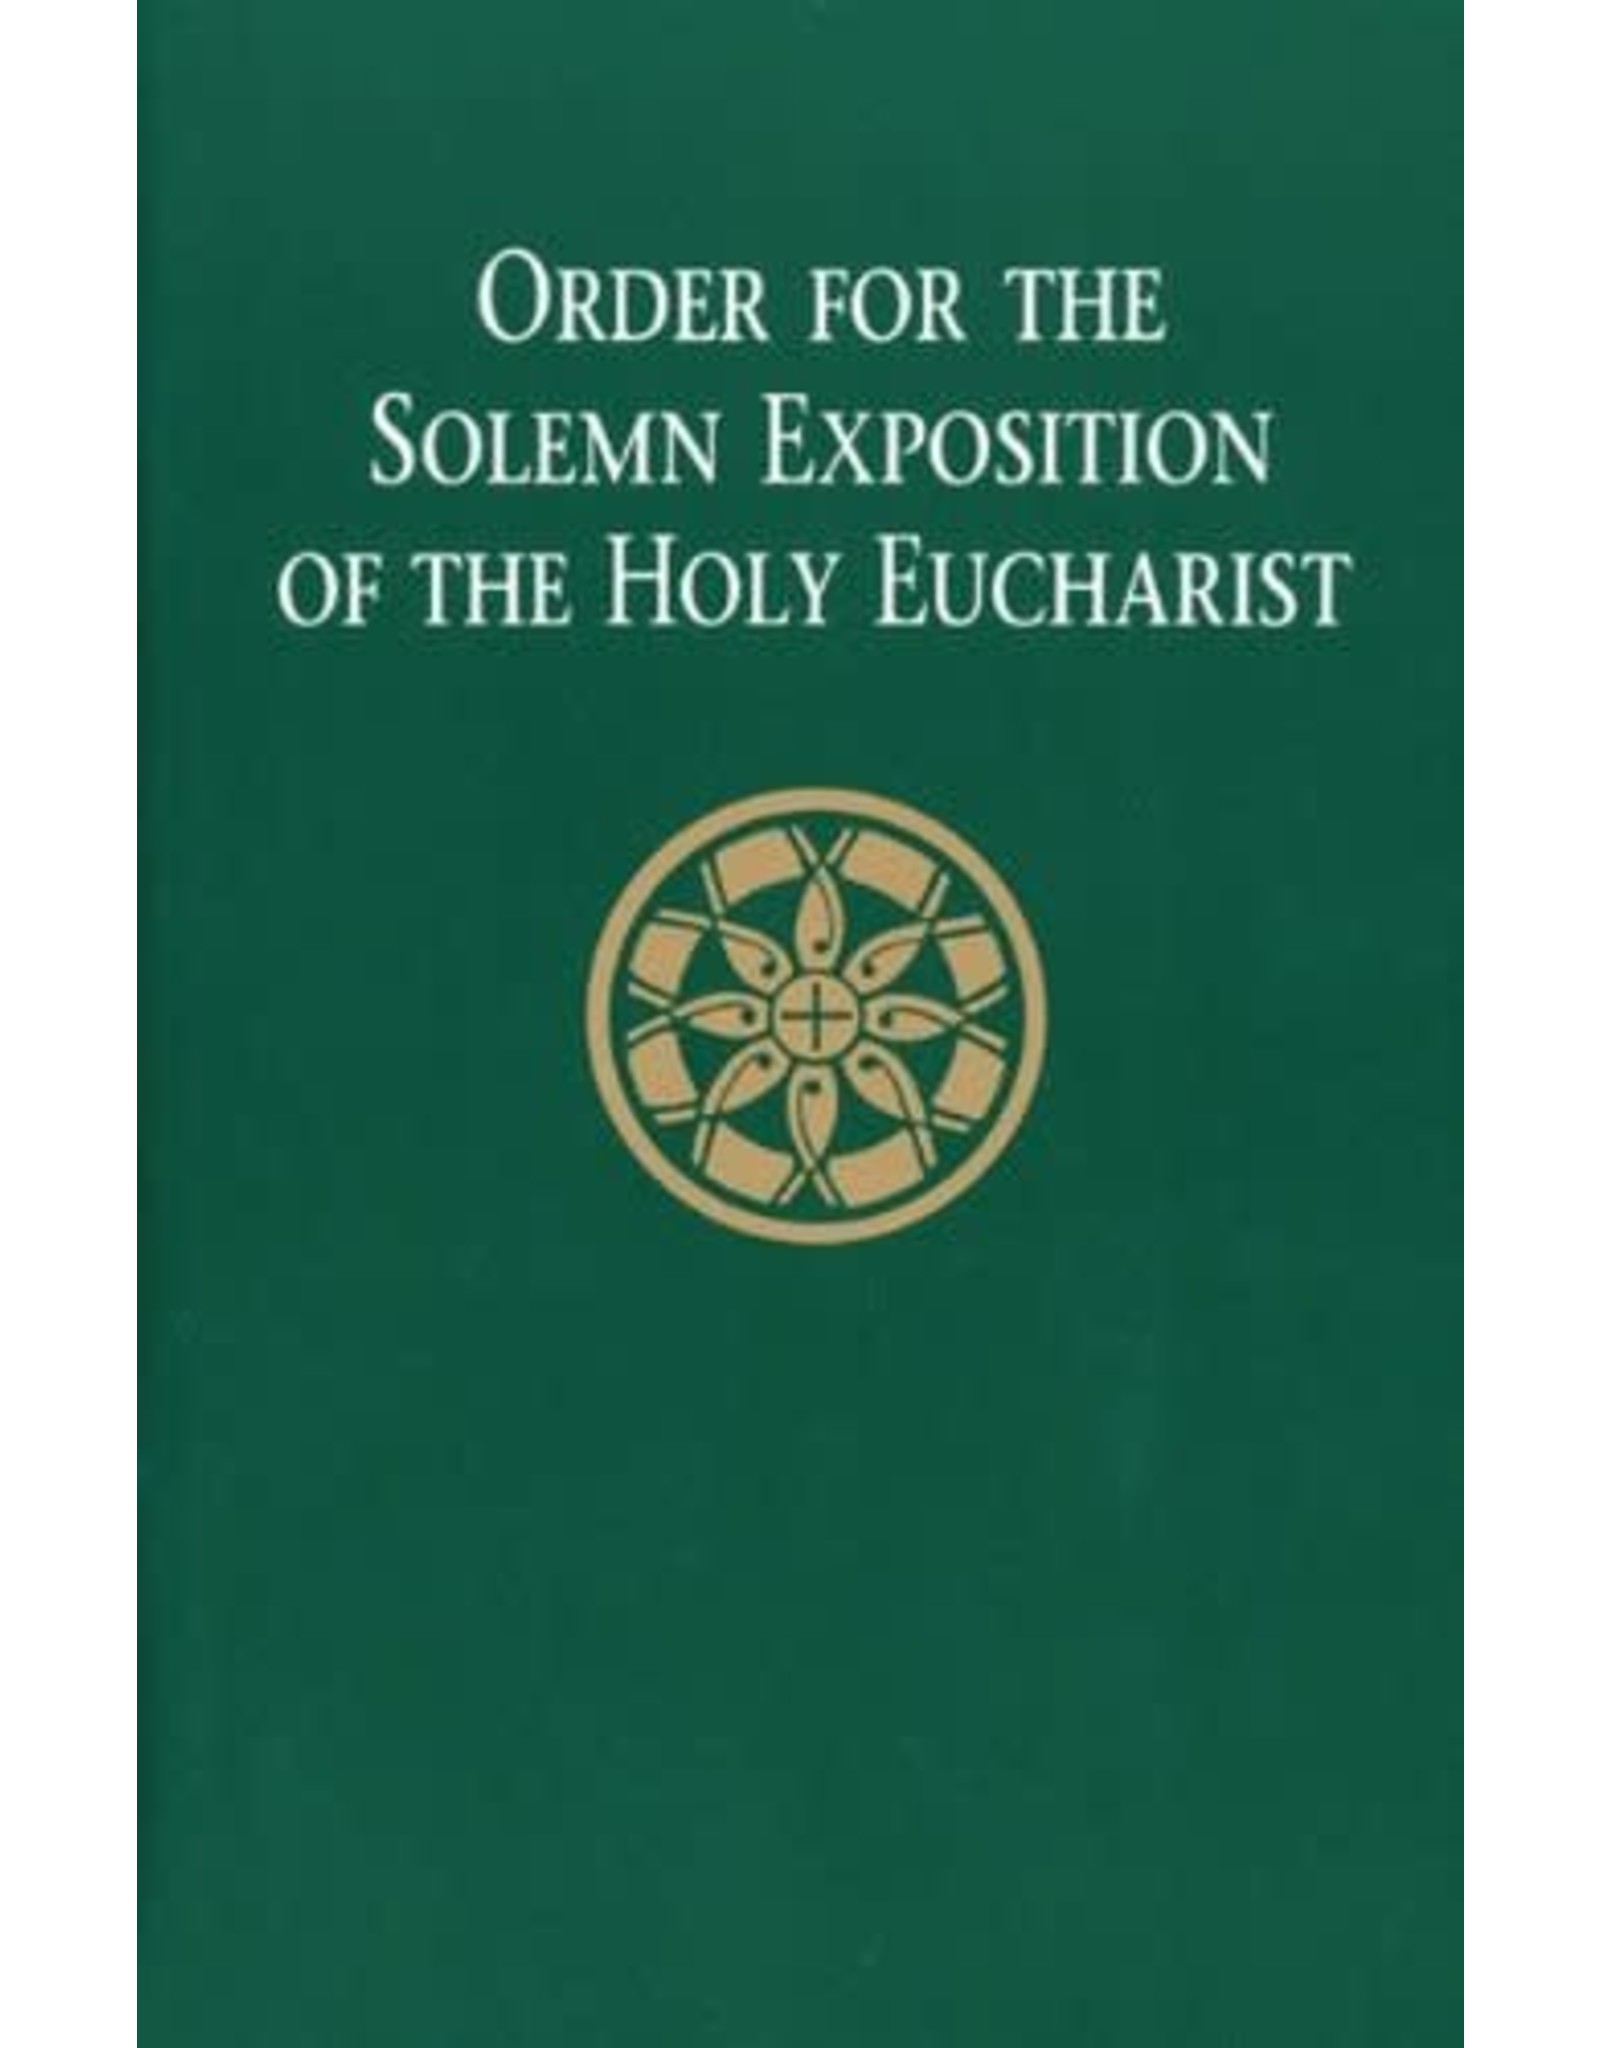 Order for the Solemn Exposition of the Holy Eucharist